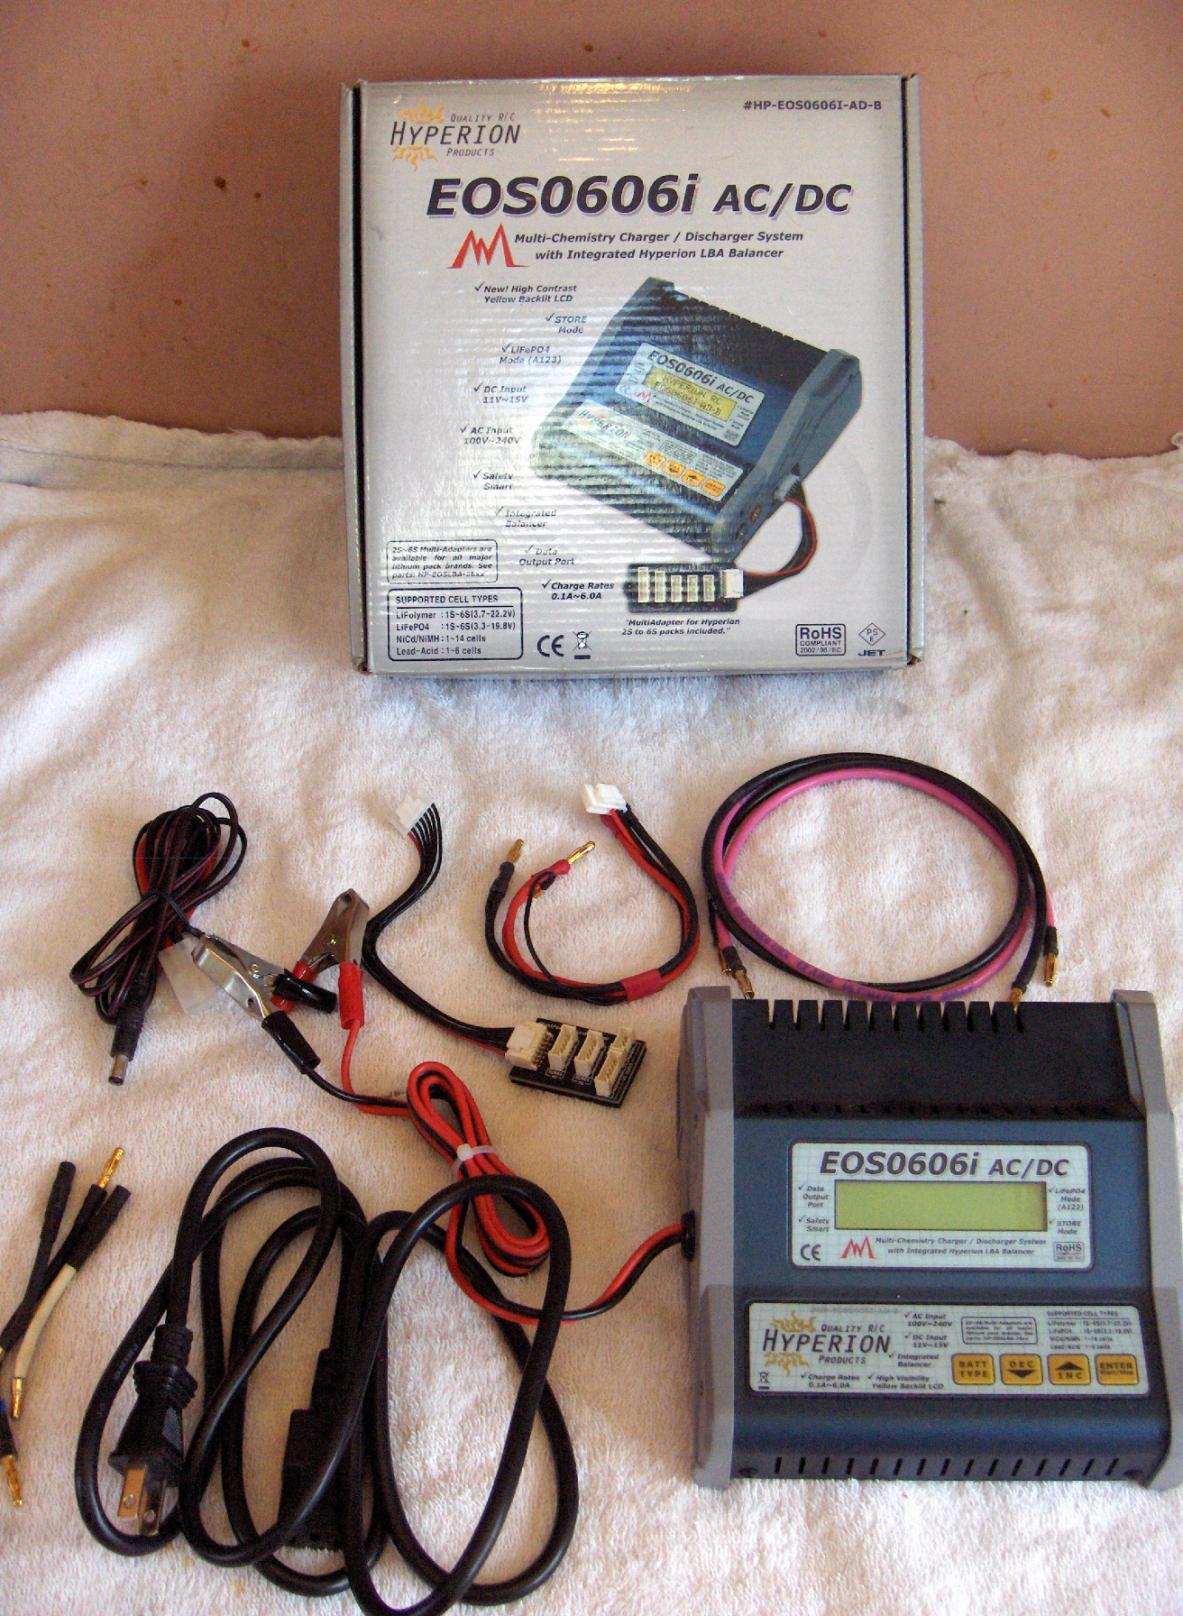 Hyperion EOS0606i AC/DC Charger - R/C Tech Forums